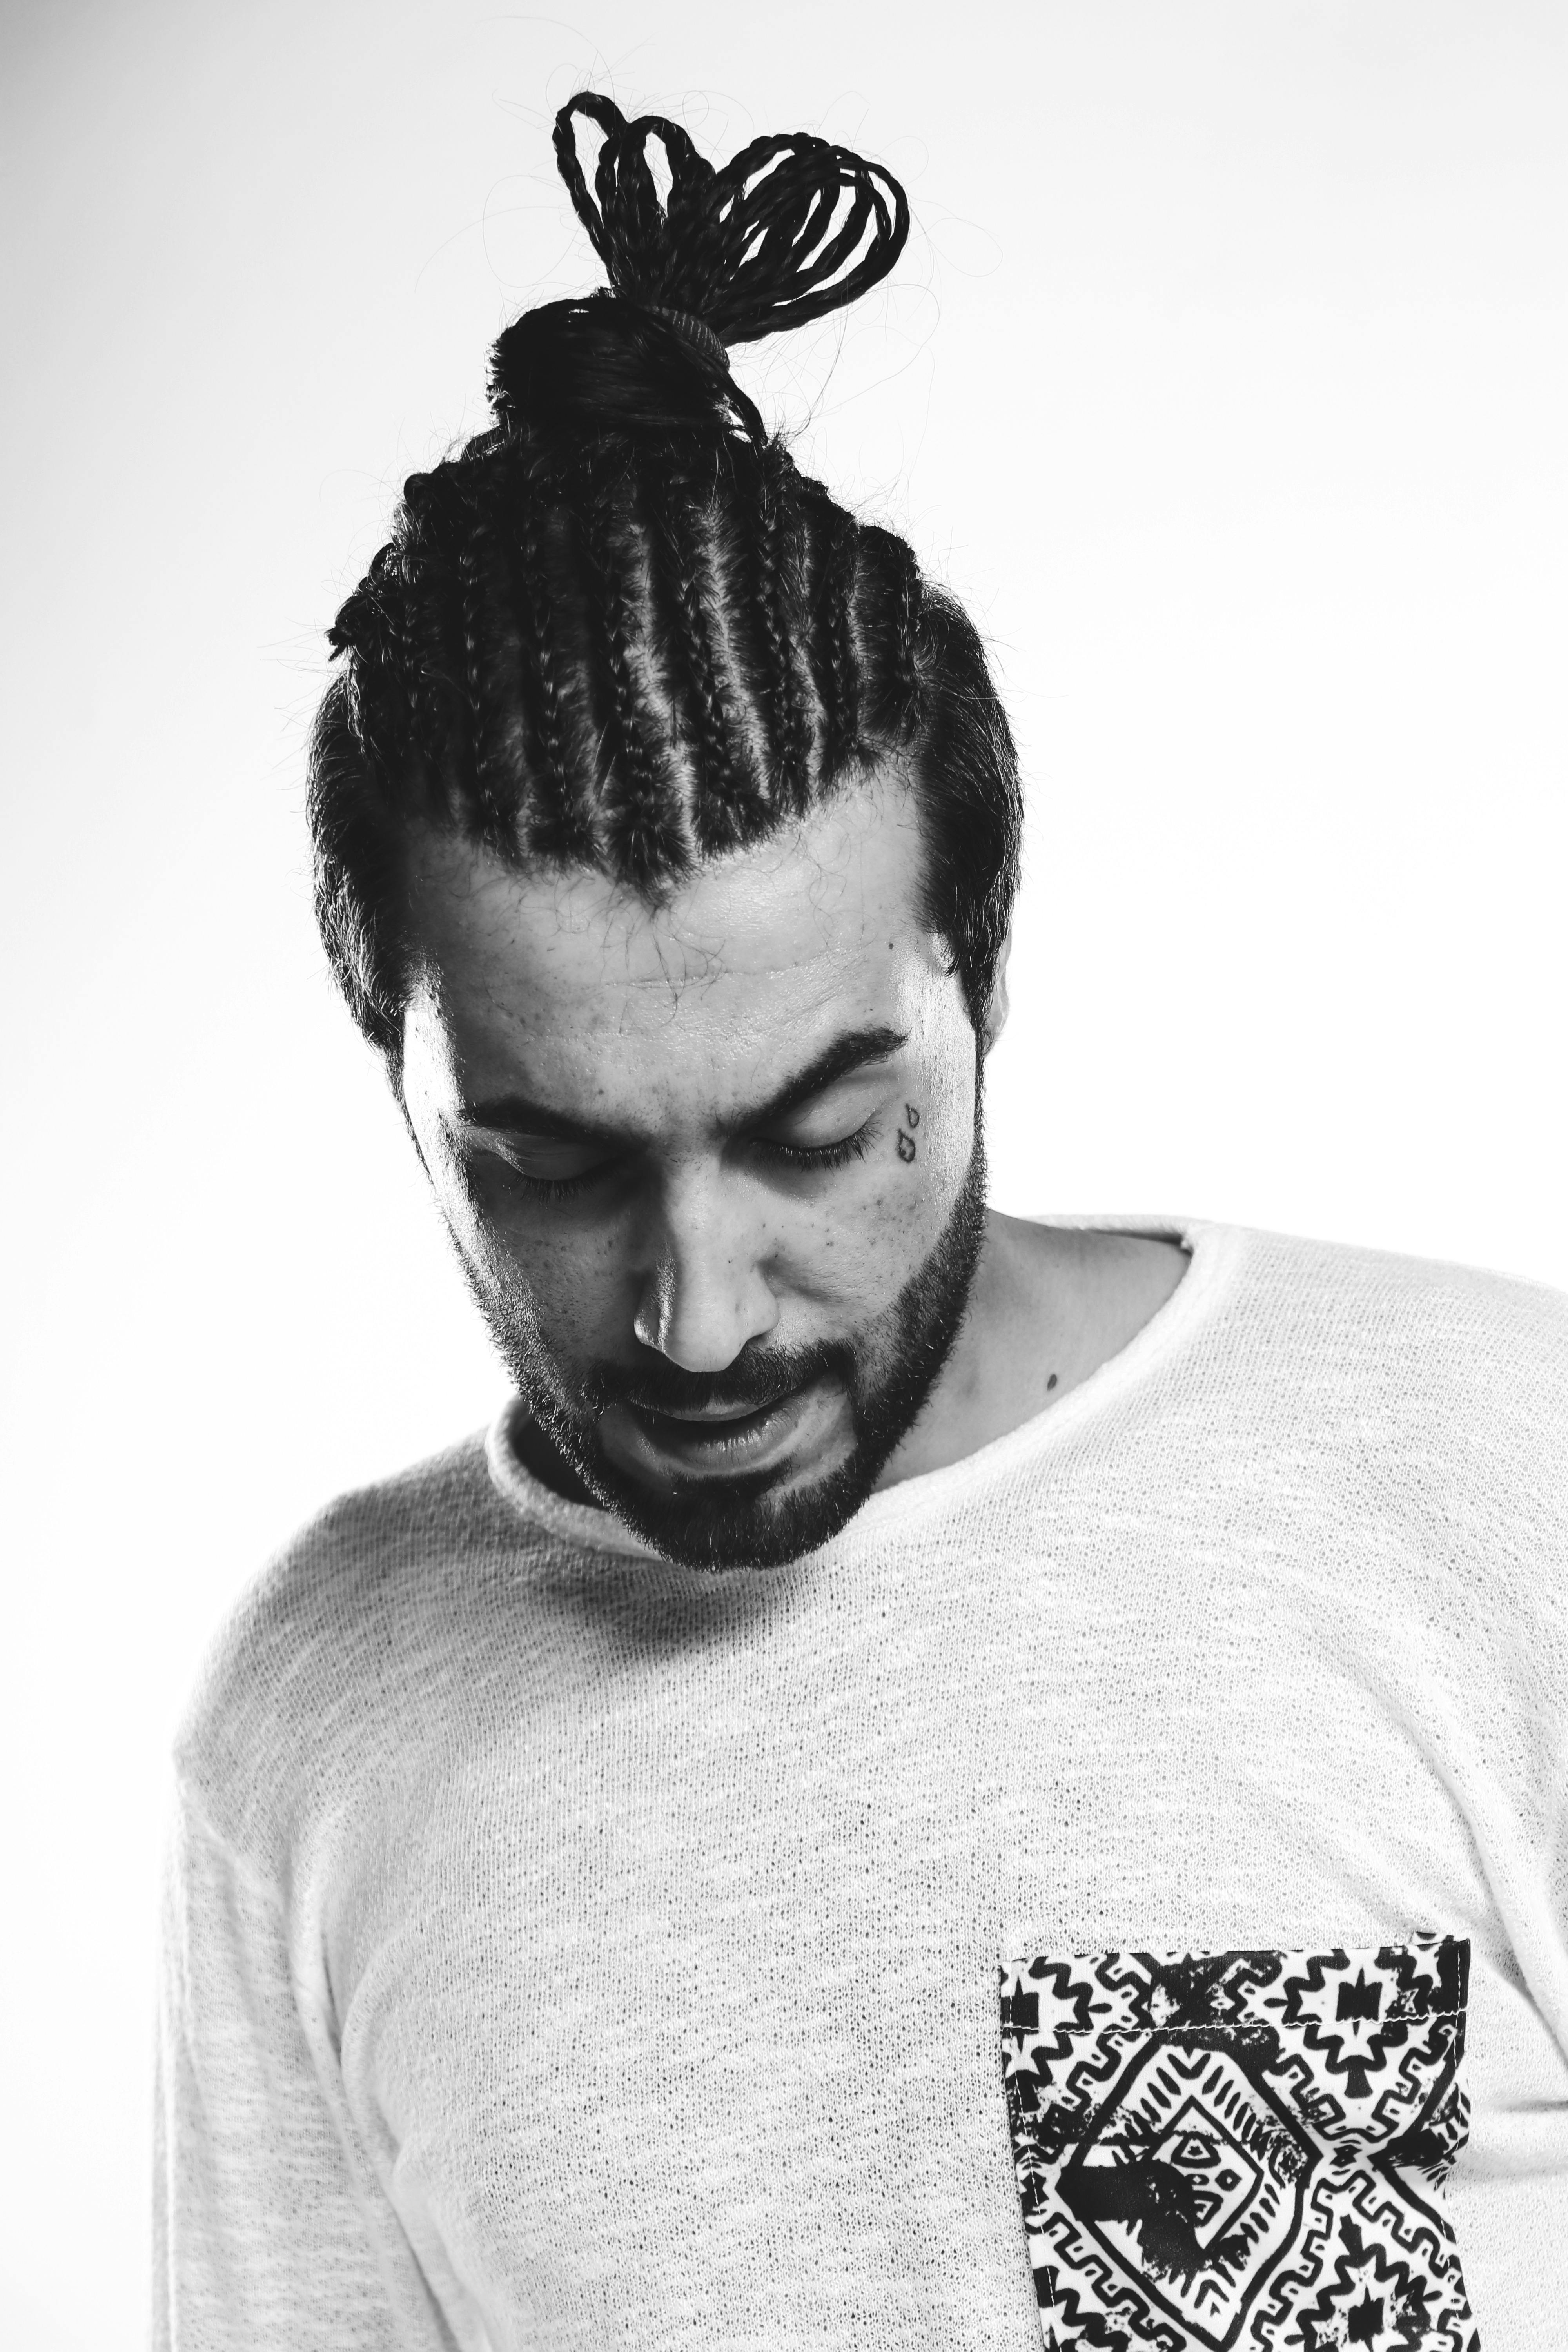 A Man with Braided Hair Wearing White Shirt · Free Stock Photo